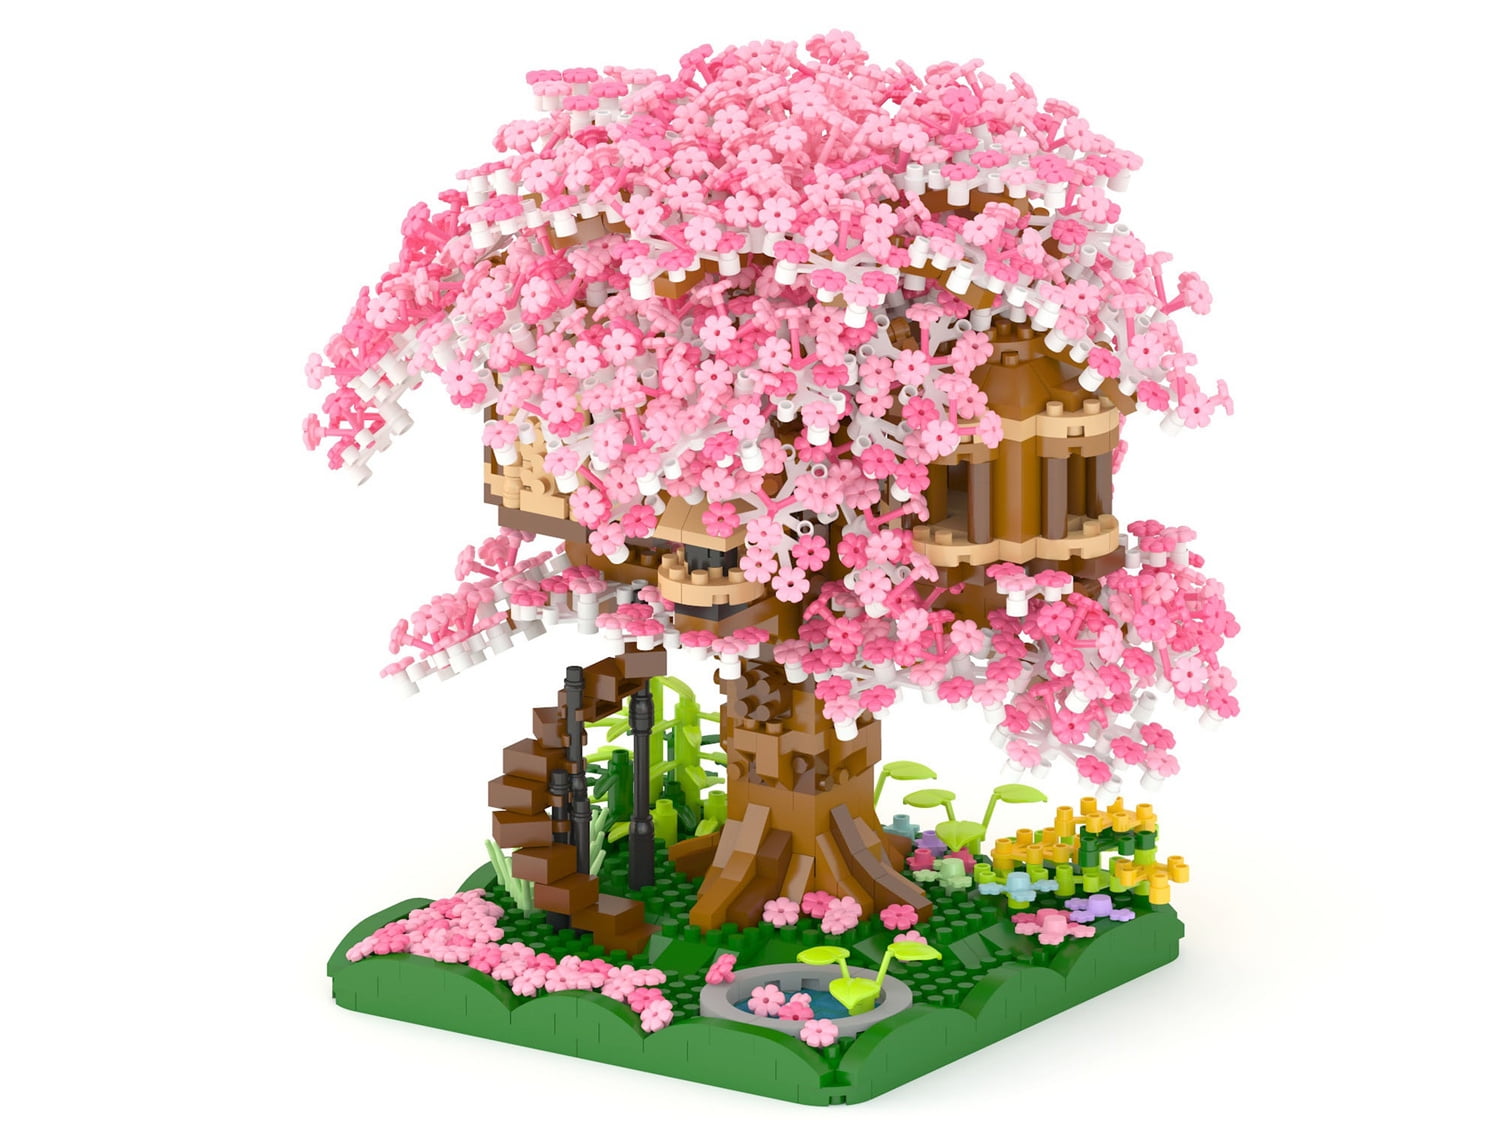  Cherry Blossom Meaningful Bonsai Tree Building Sets,Japanese  Style Sakura Tree Mini Building Blocks(1286 PCS),Enjoy Your Own Beautiful  Display Show, Present for Kids and Adults : Grocery & Gourmet Food